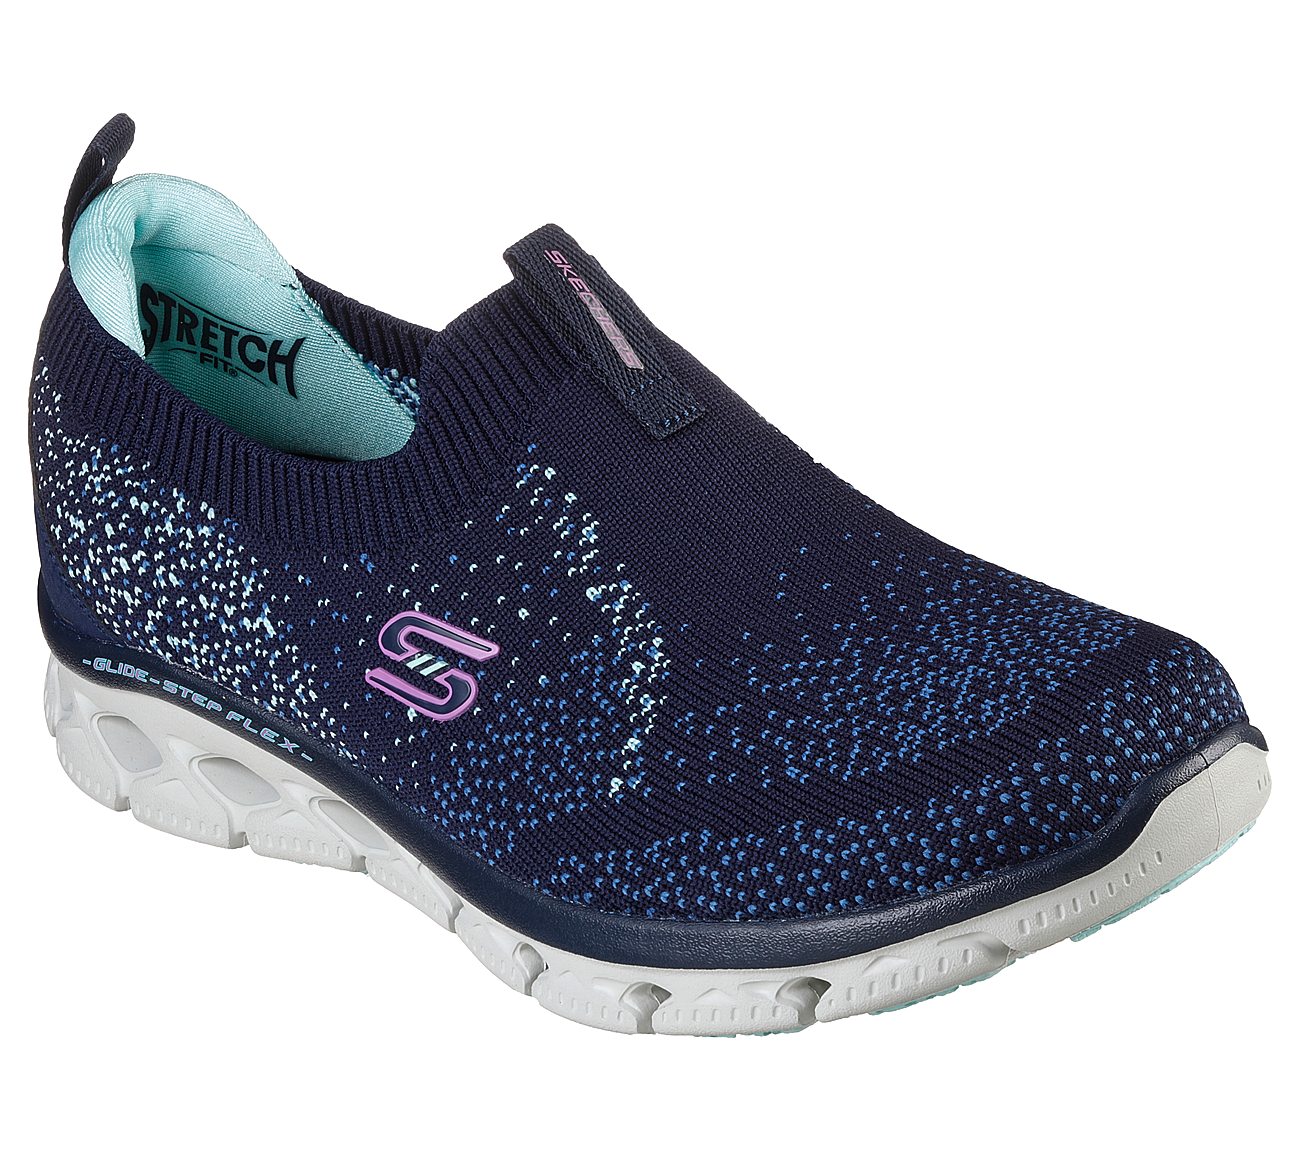 GLIDE-STEP FLEX, NAVY/TURQUOISE Footwear Lateral View